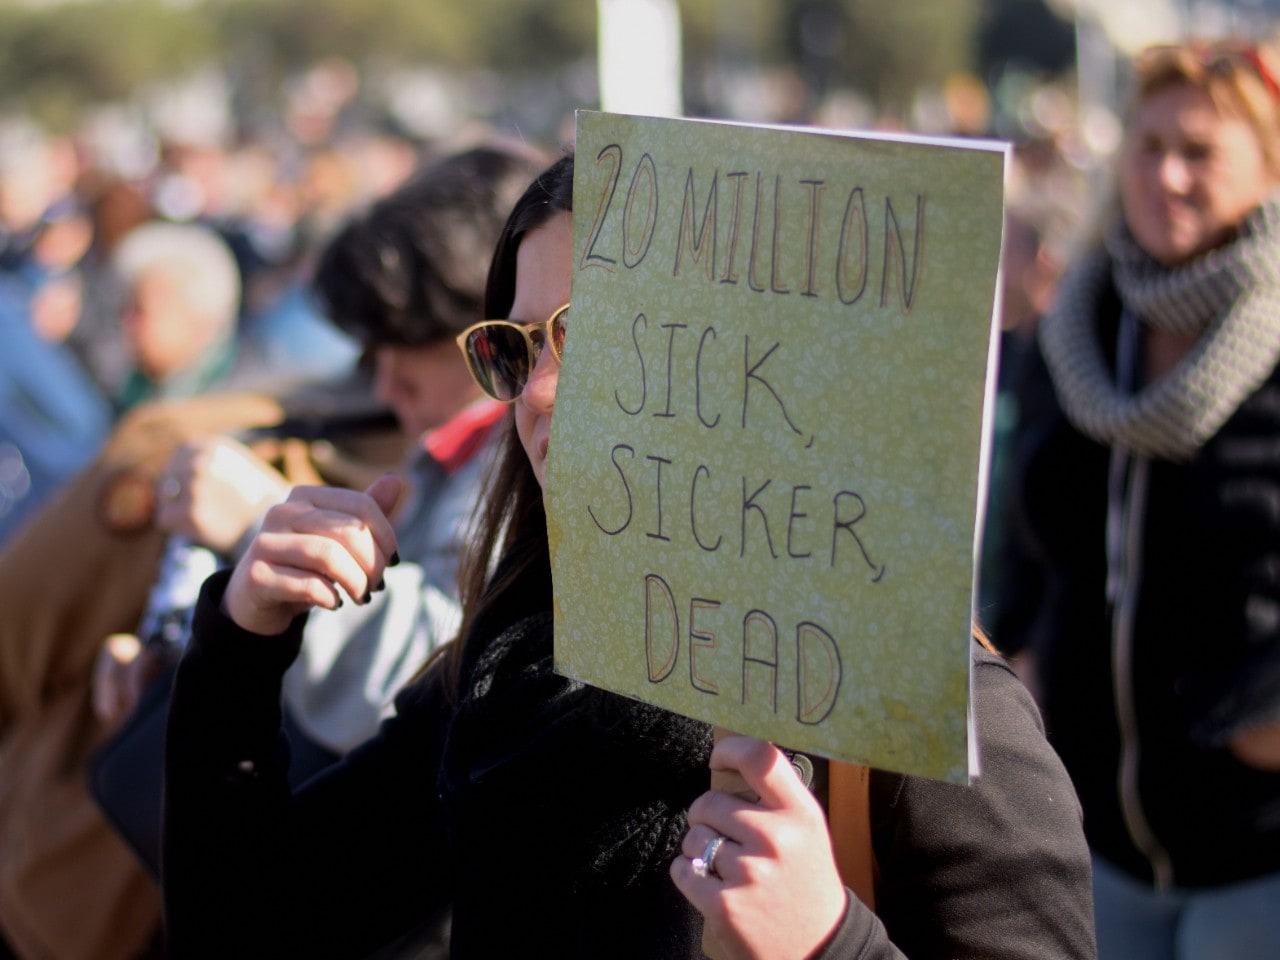 A demonstrator taking part in a protest against a proposed repeal of the Affordable Care Act in January 2017. Image: Tom Hilton/Wikimedia Commons.